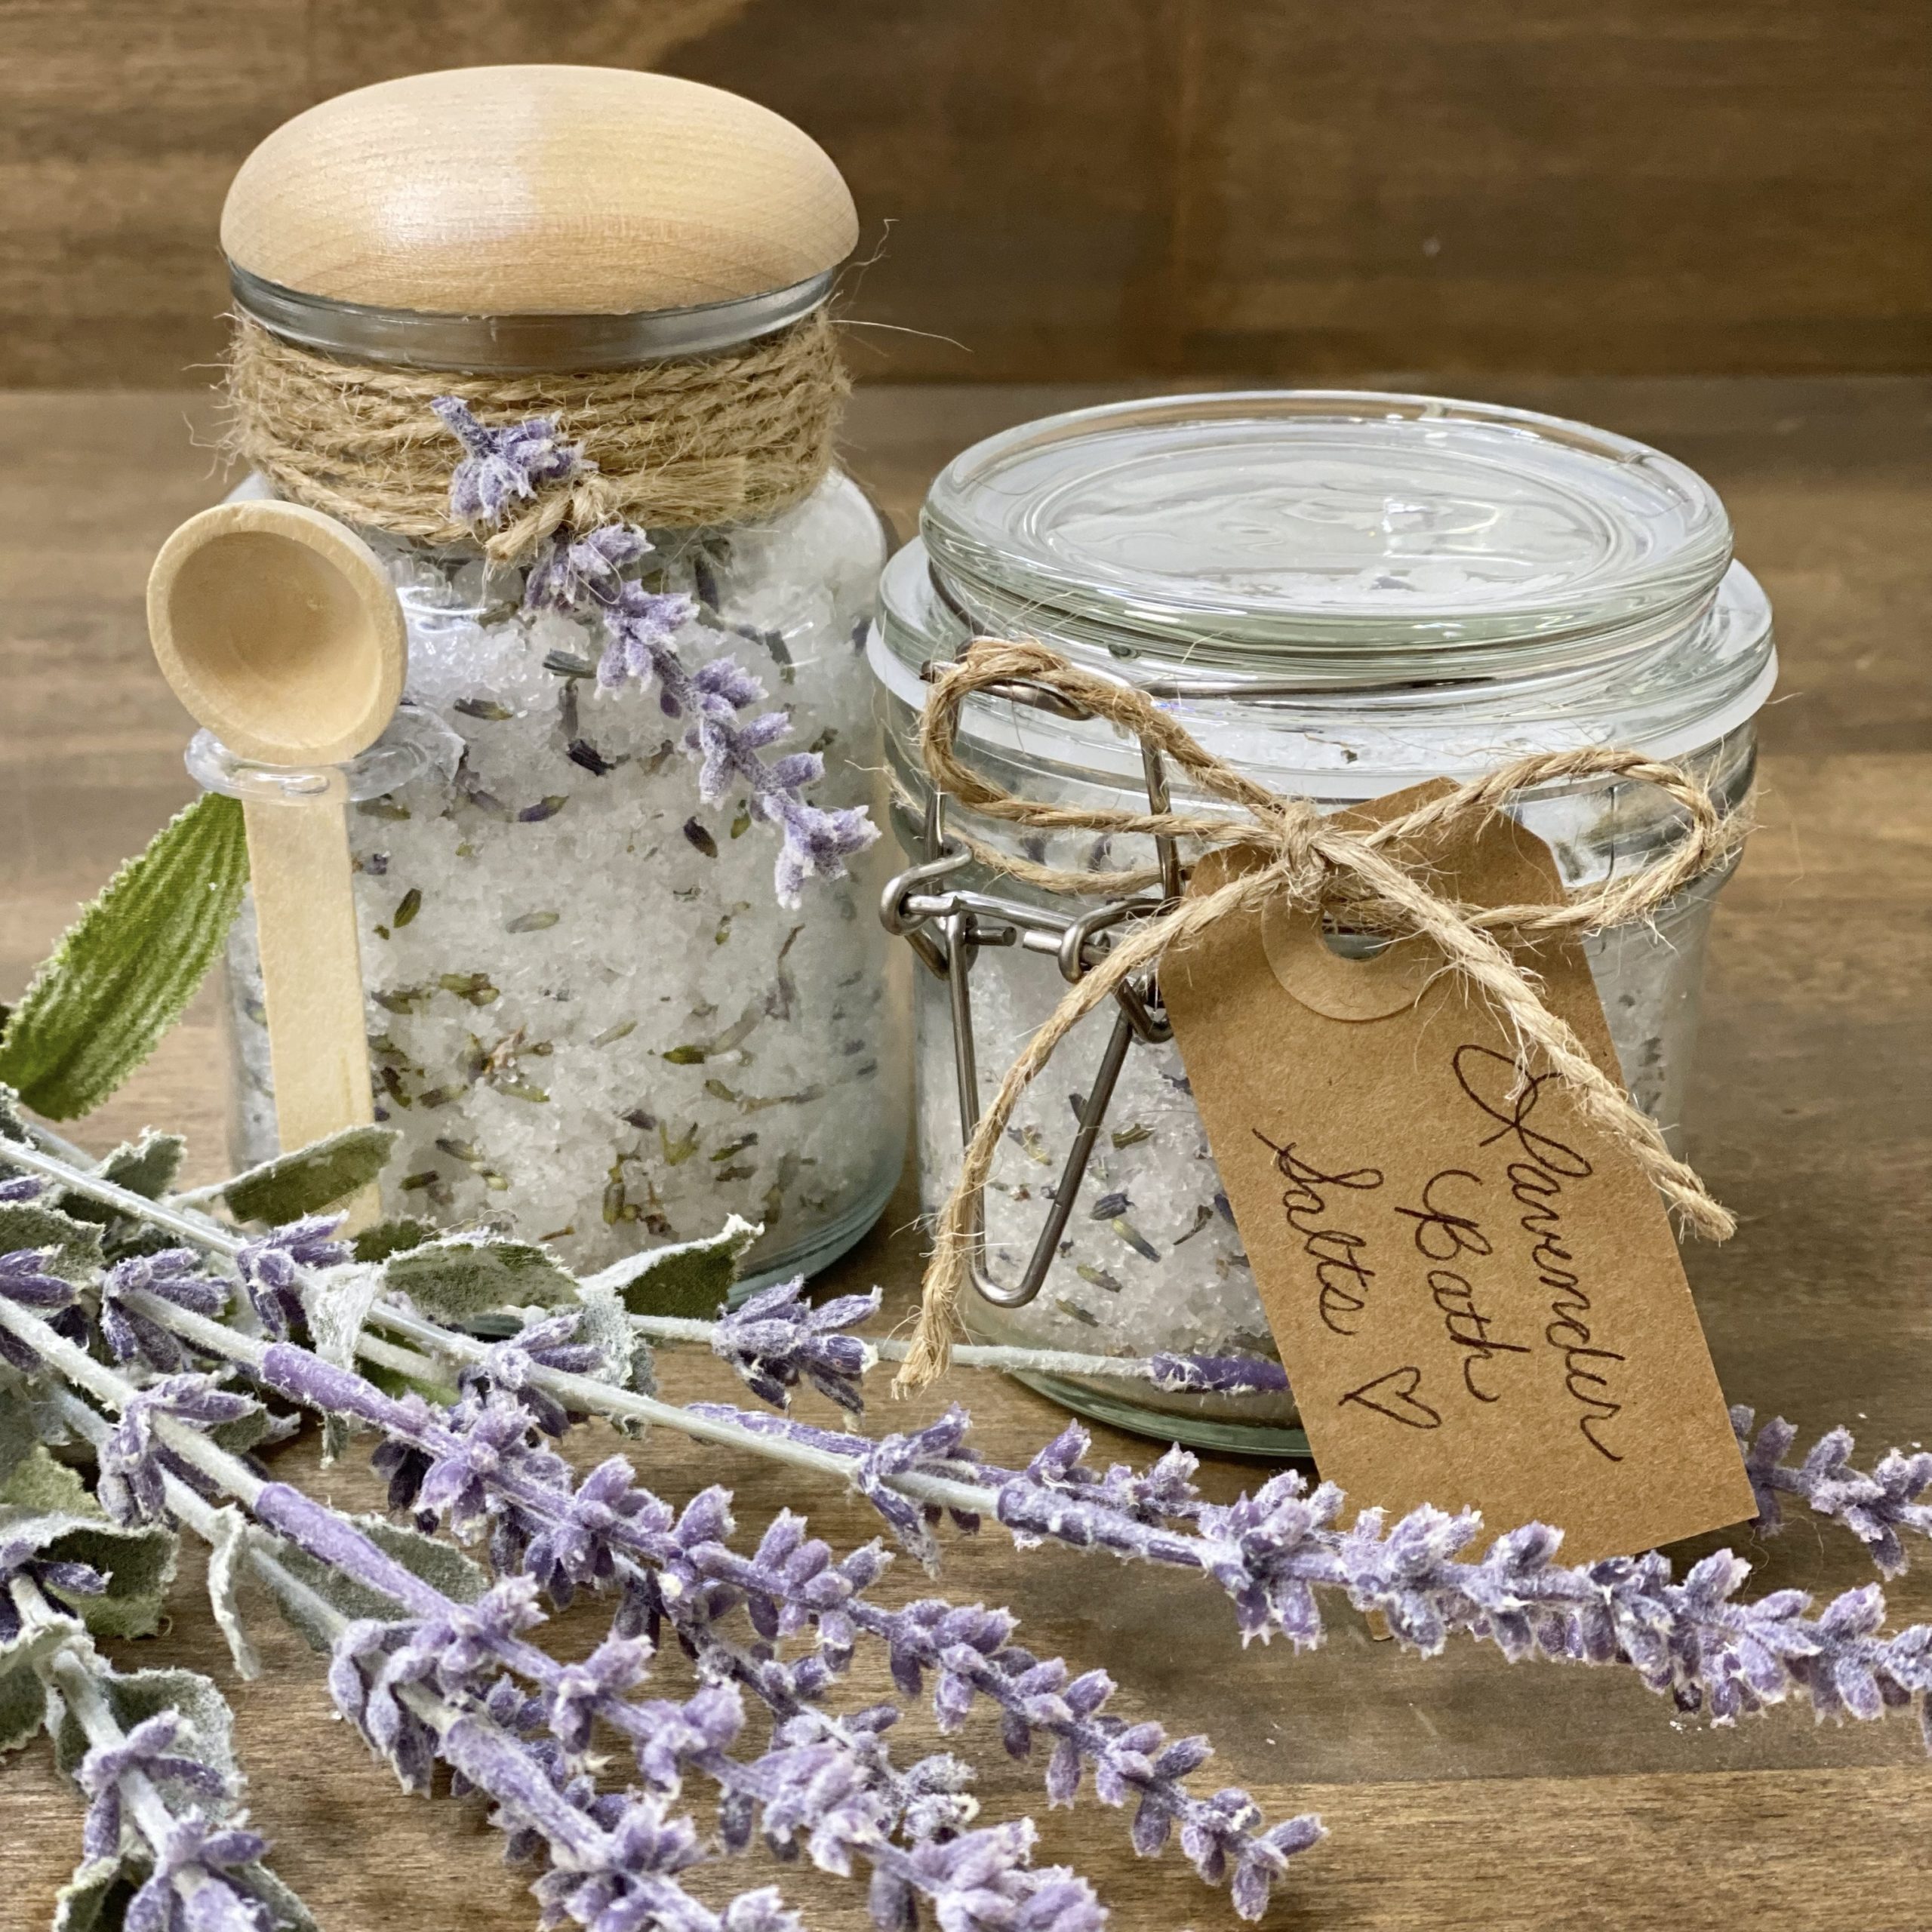 Homemade lavender bath salts in jars with lavender in the foreground.